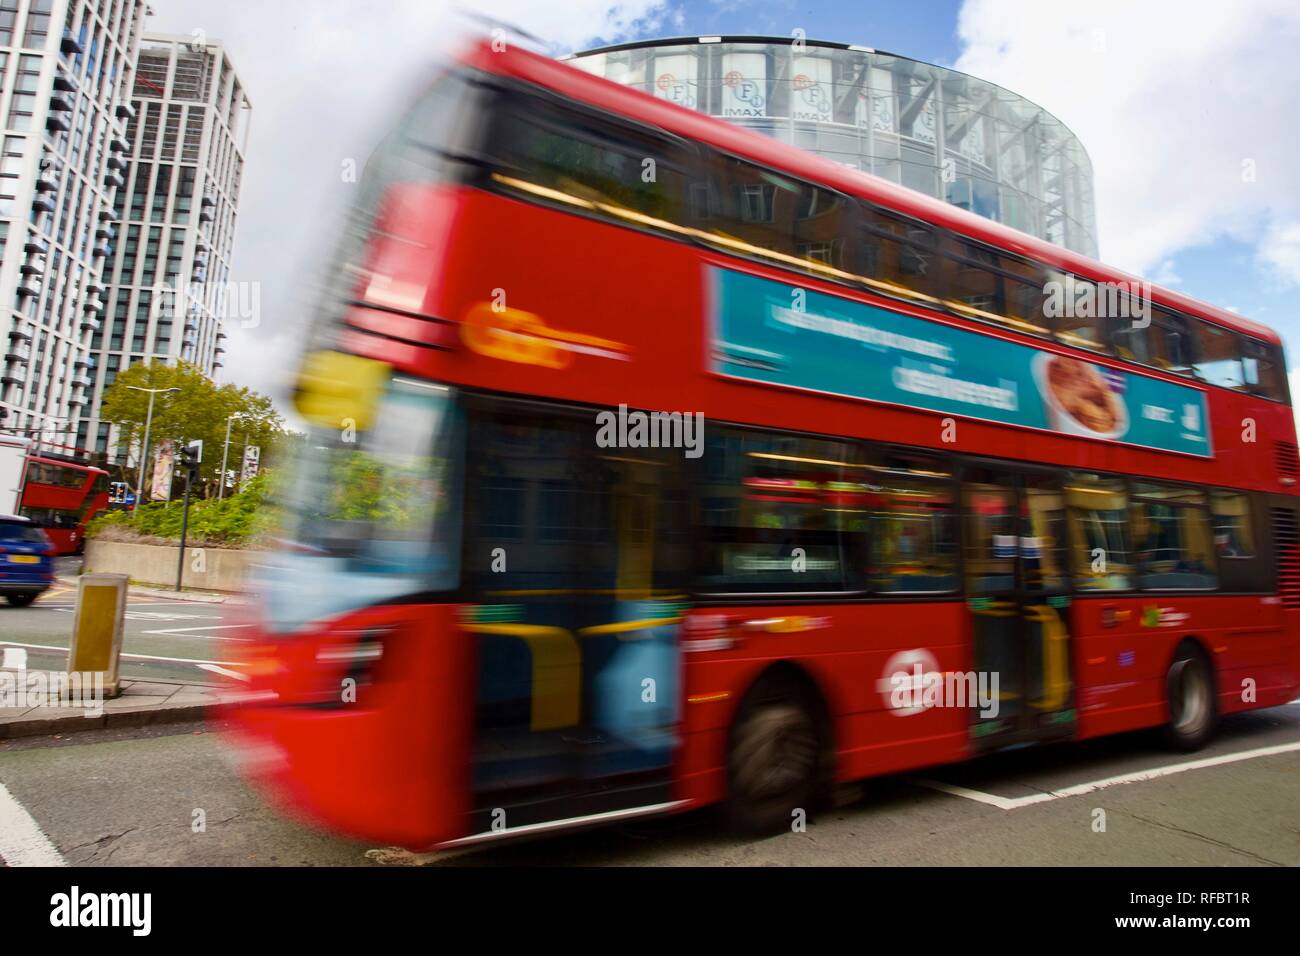 Red bus, London, England Stock Photo